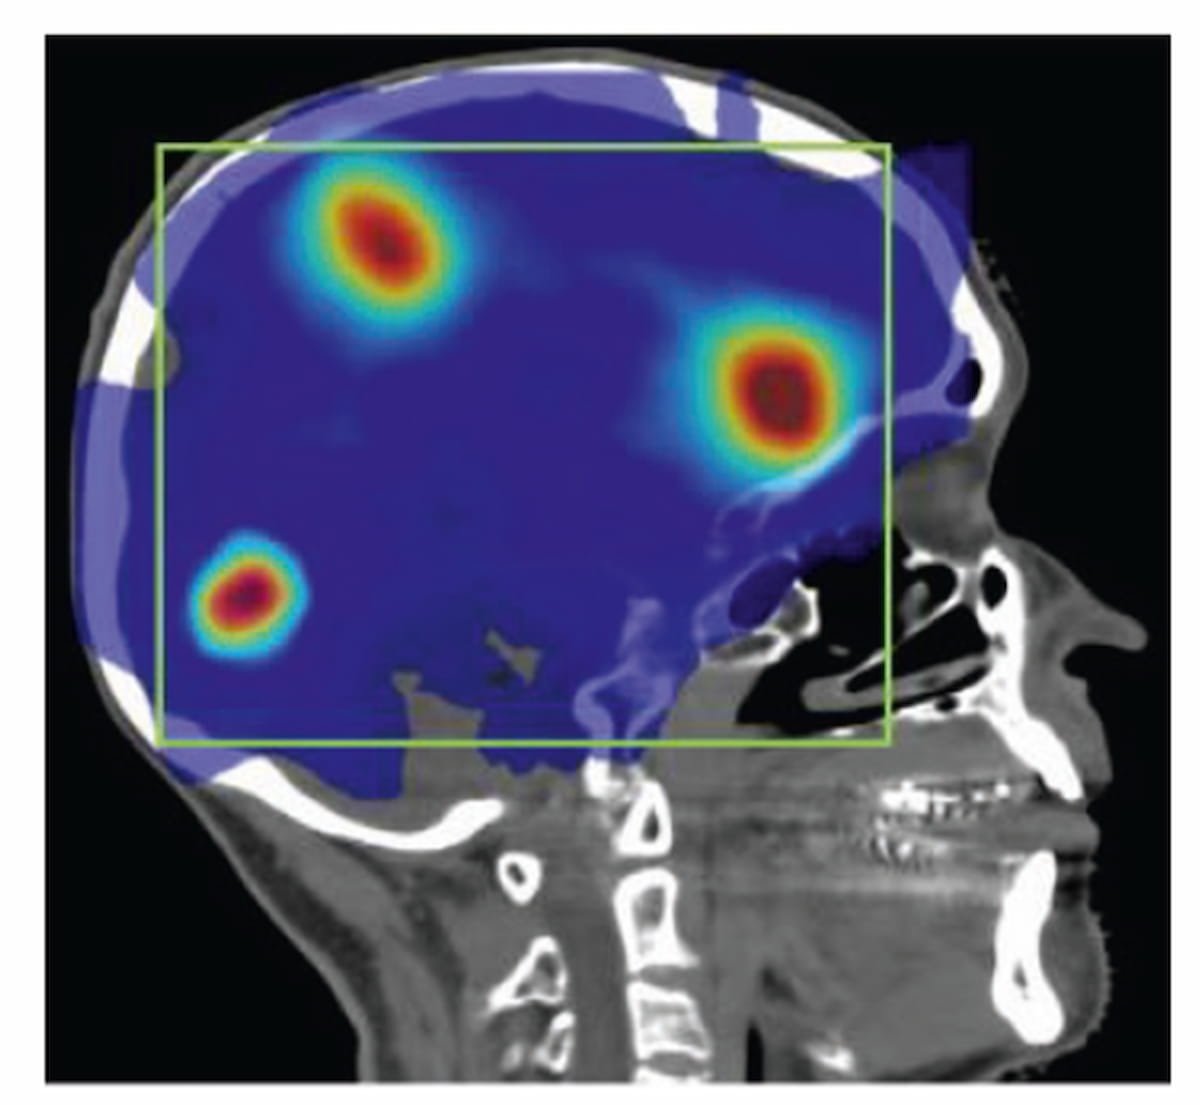 What Does the Future Hold for Brain Imaging and #Radiotherapy? diagnosticimaging.com/view/what-does…
@ACRRFS @ACRYPS @RadiologyACR @ARRS_Radiology @JNeuroradiology @TheASNR @ASTRO_org @PennRadiology @EmoryRadiology @UABRadiology @NYUImaging @OSURadiology 
#radiology #RadRes #neuroradiology